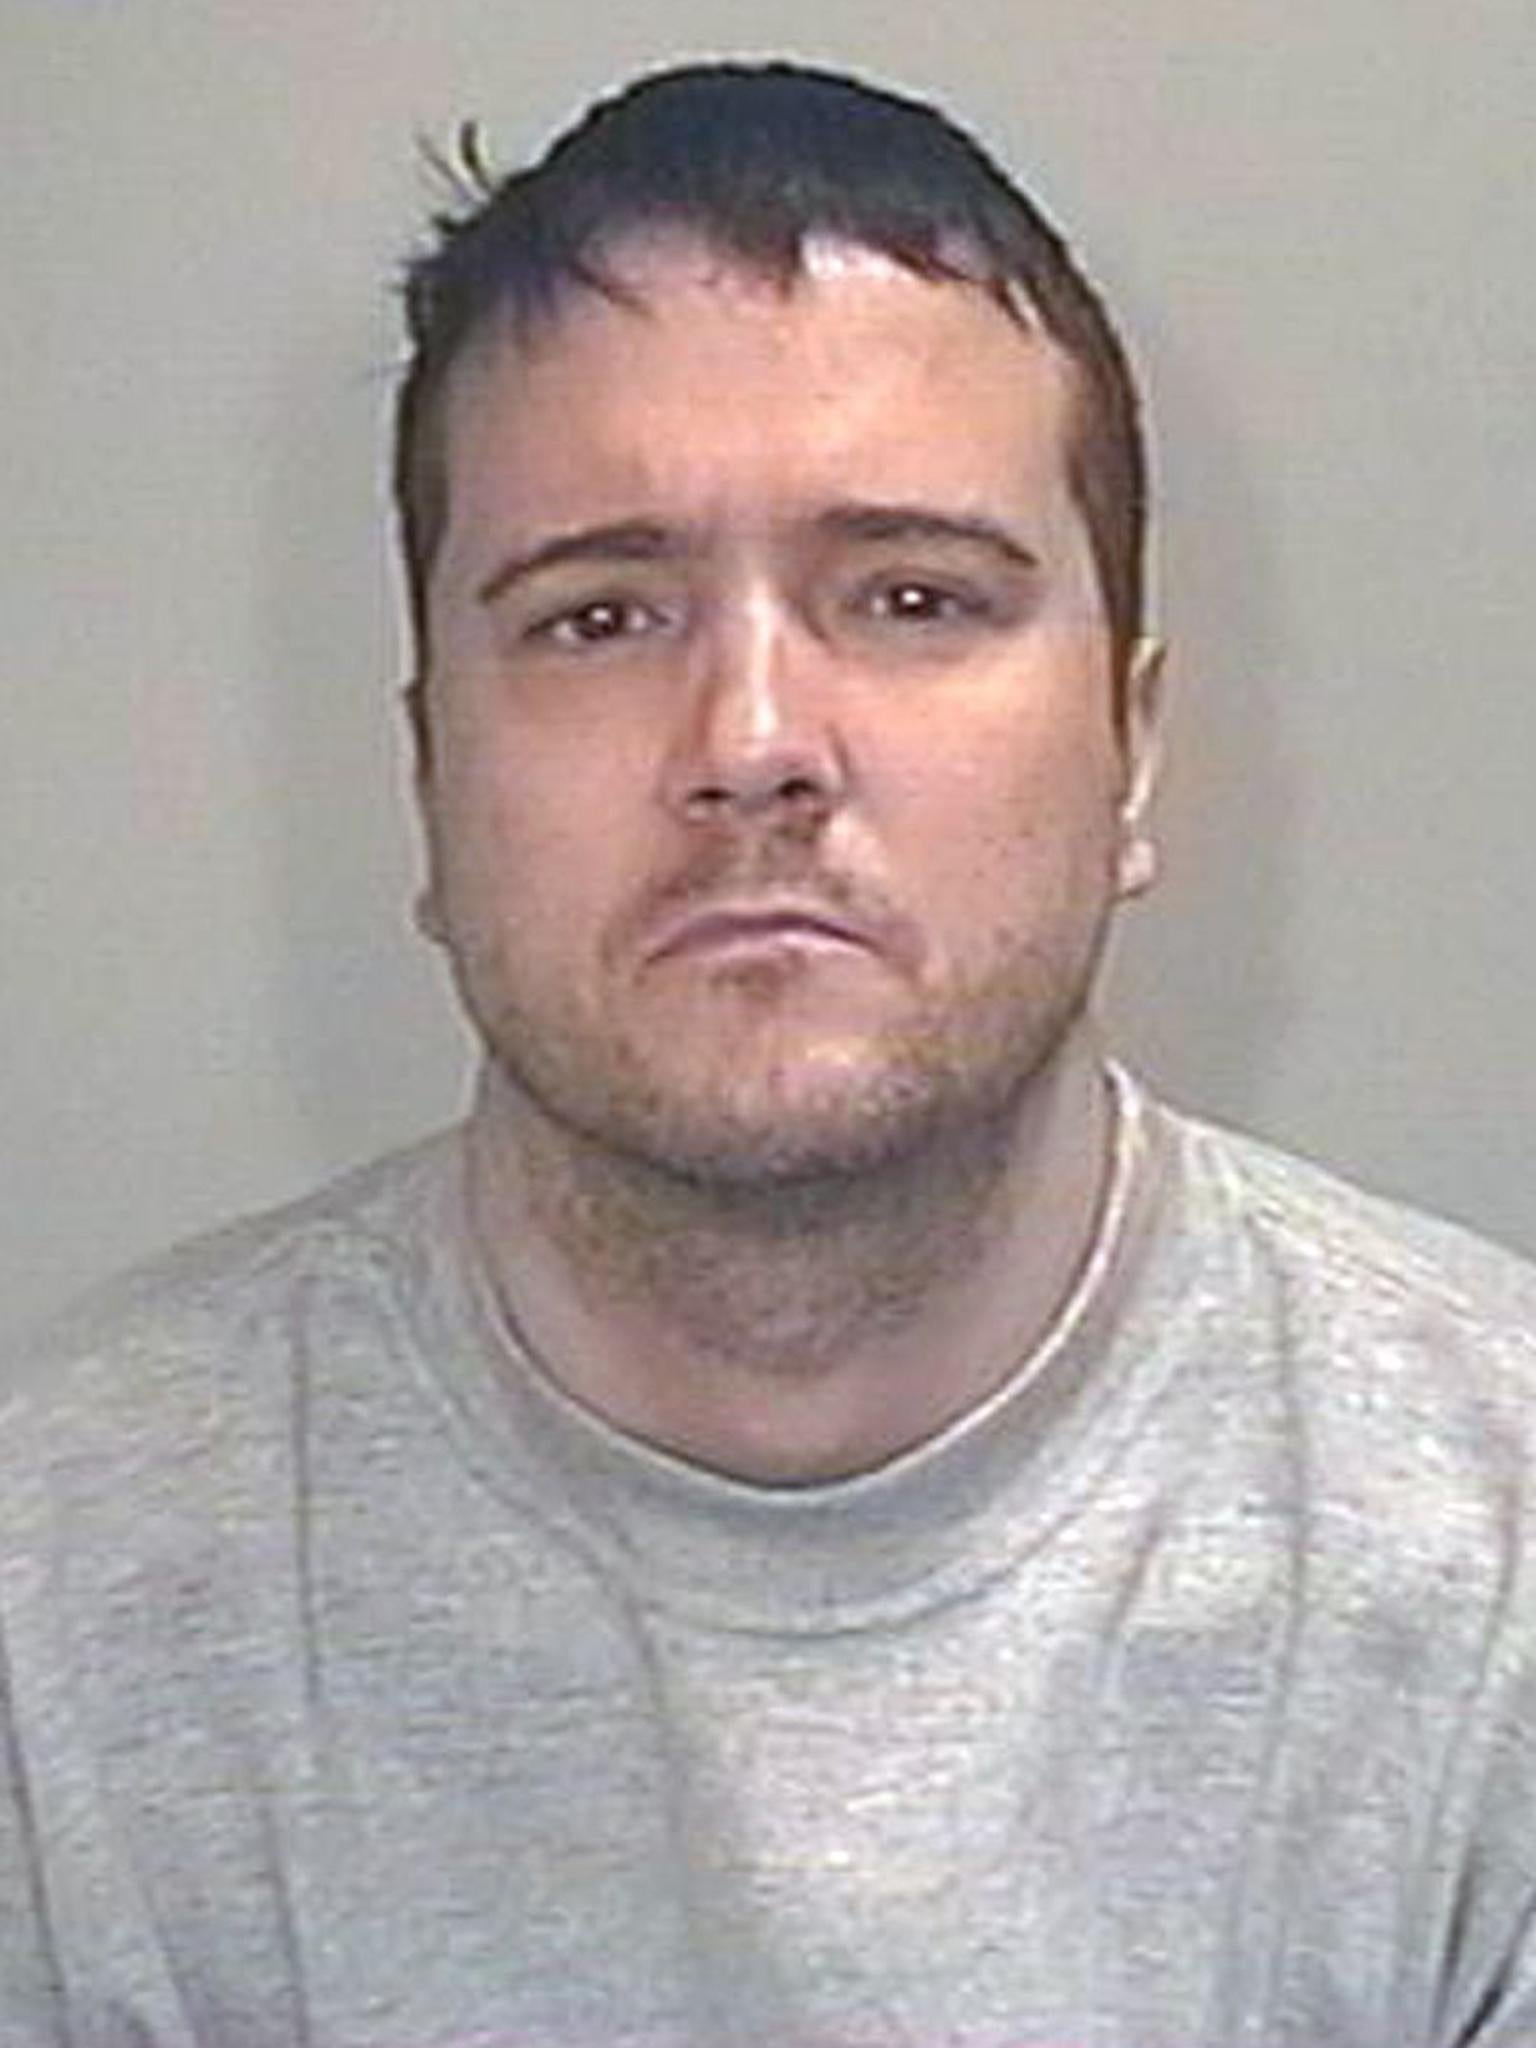 Stephen Griffiths was living in a Bradford flat when he murdered three sex workers (Rex)